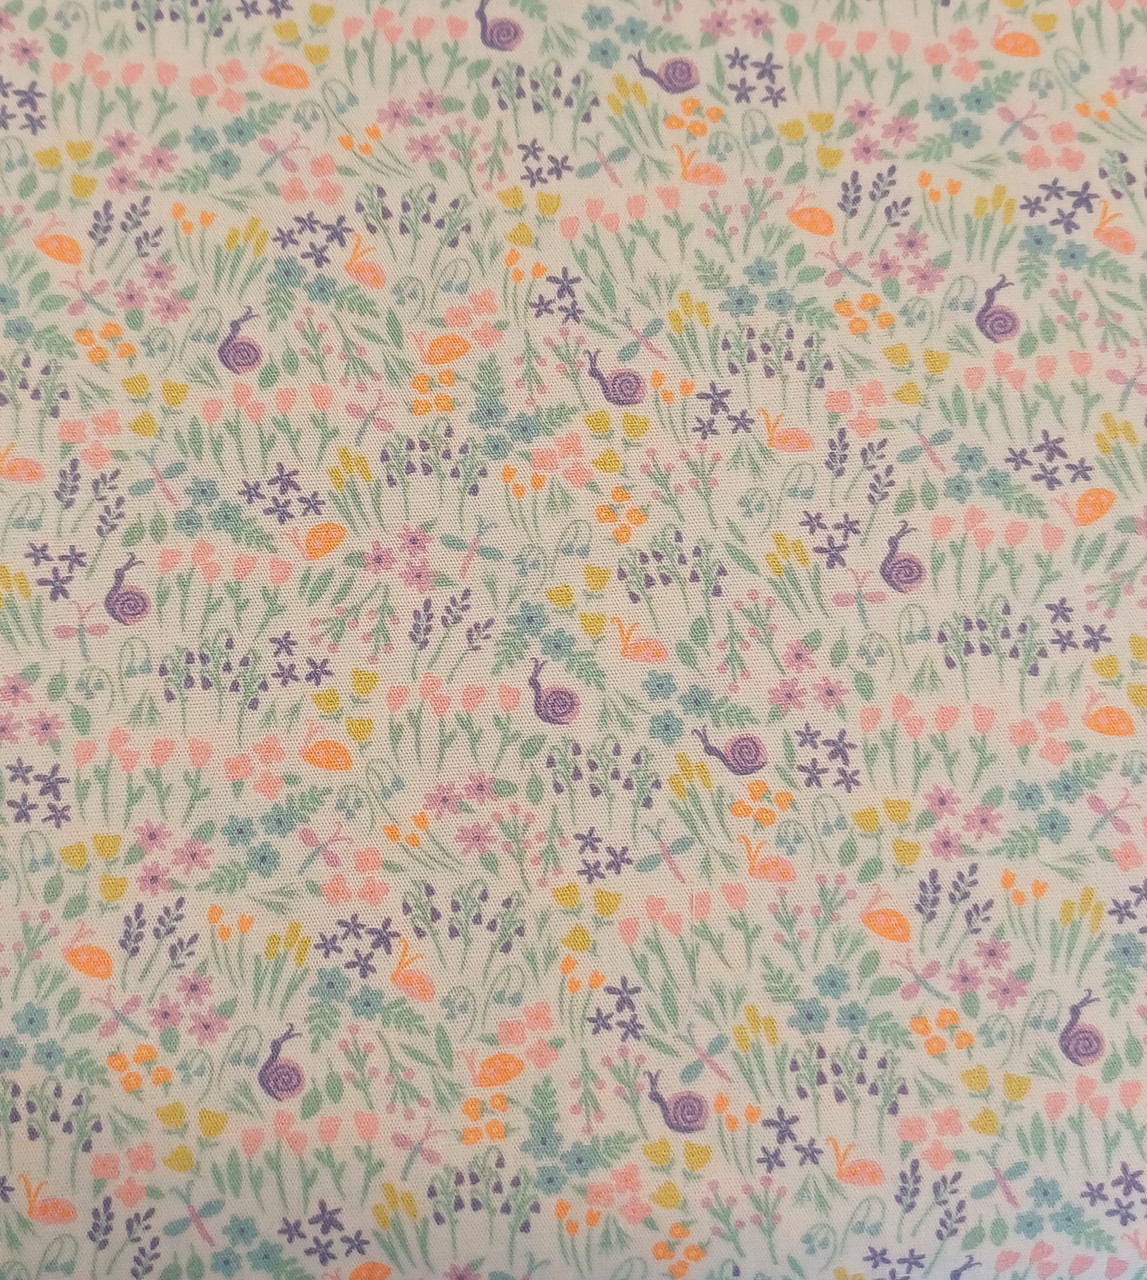 A really pretty floral print fabric, With snails and Dragonflies, 100% cotton, 150 cm (60" wide), Priced per metre, Wash at 30 degrees, 
This fabric has aqua, purple, yellow, and orange flowers, snails, and dragonflies on a solid white background, Will be perfect for your next dress or other outfits.